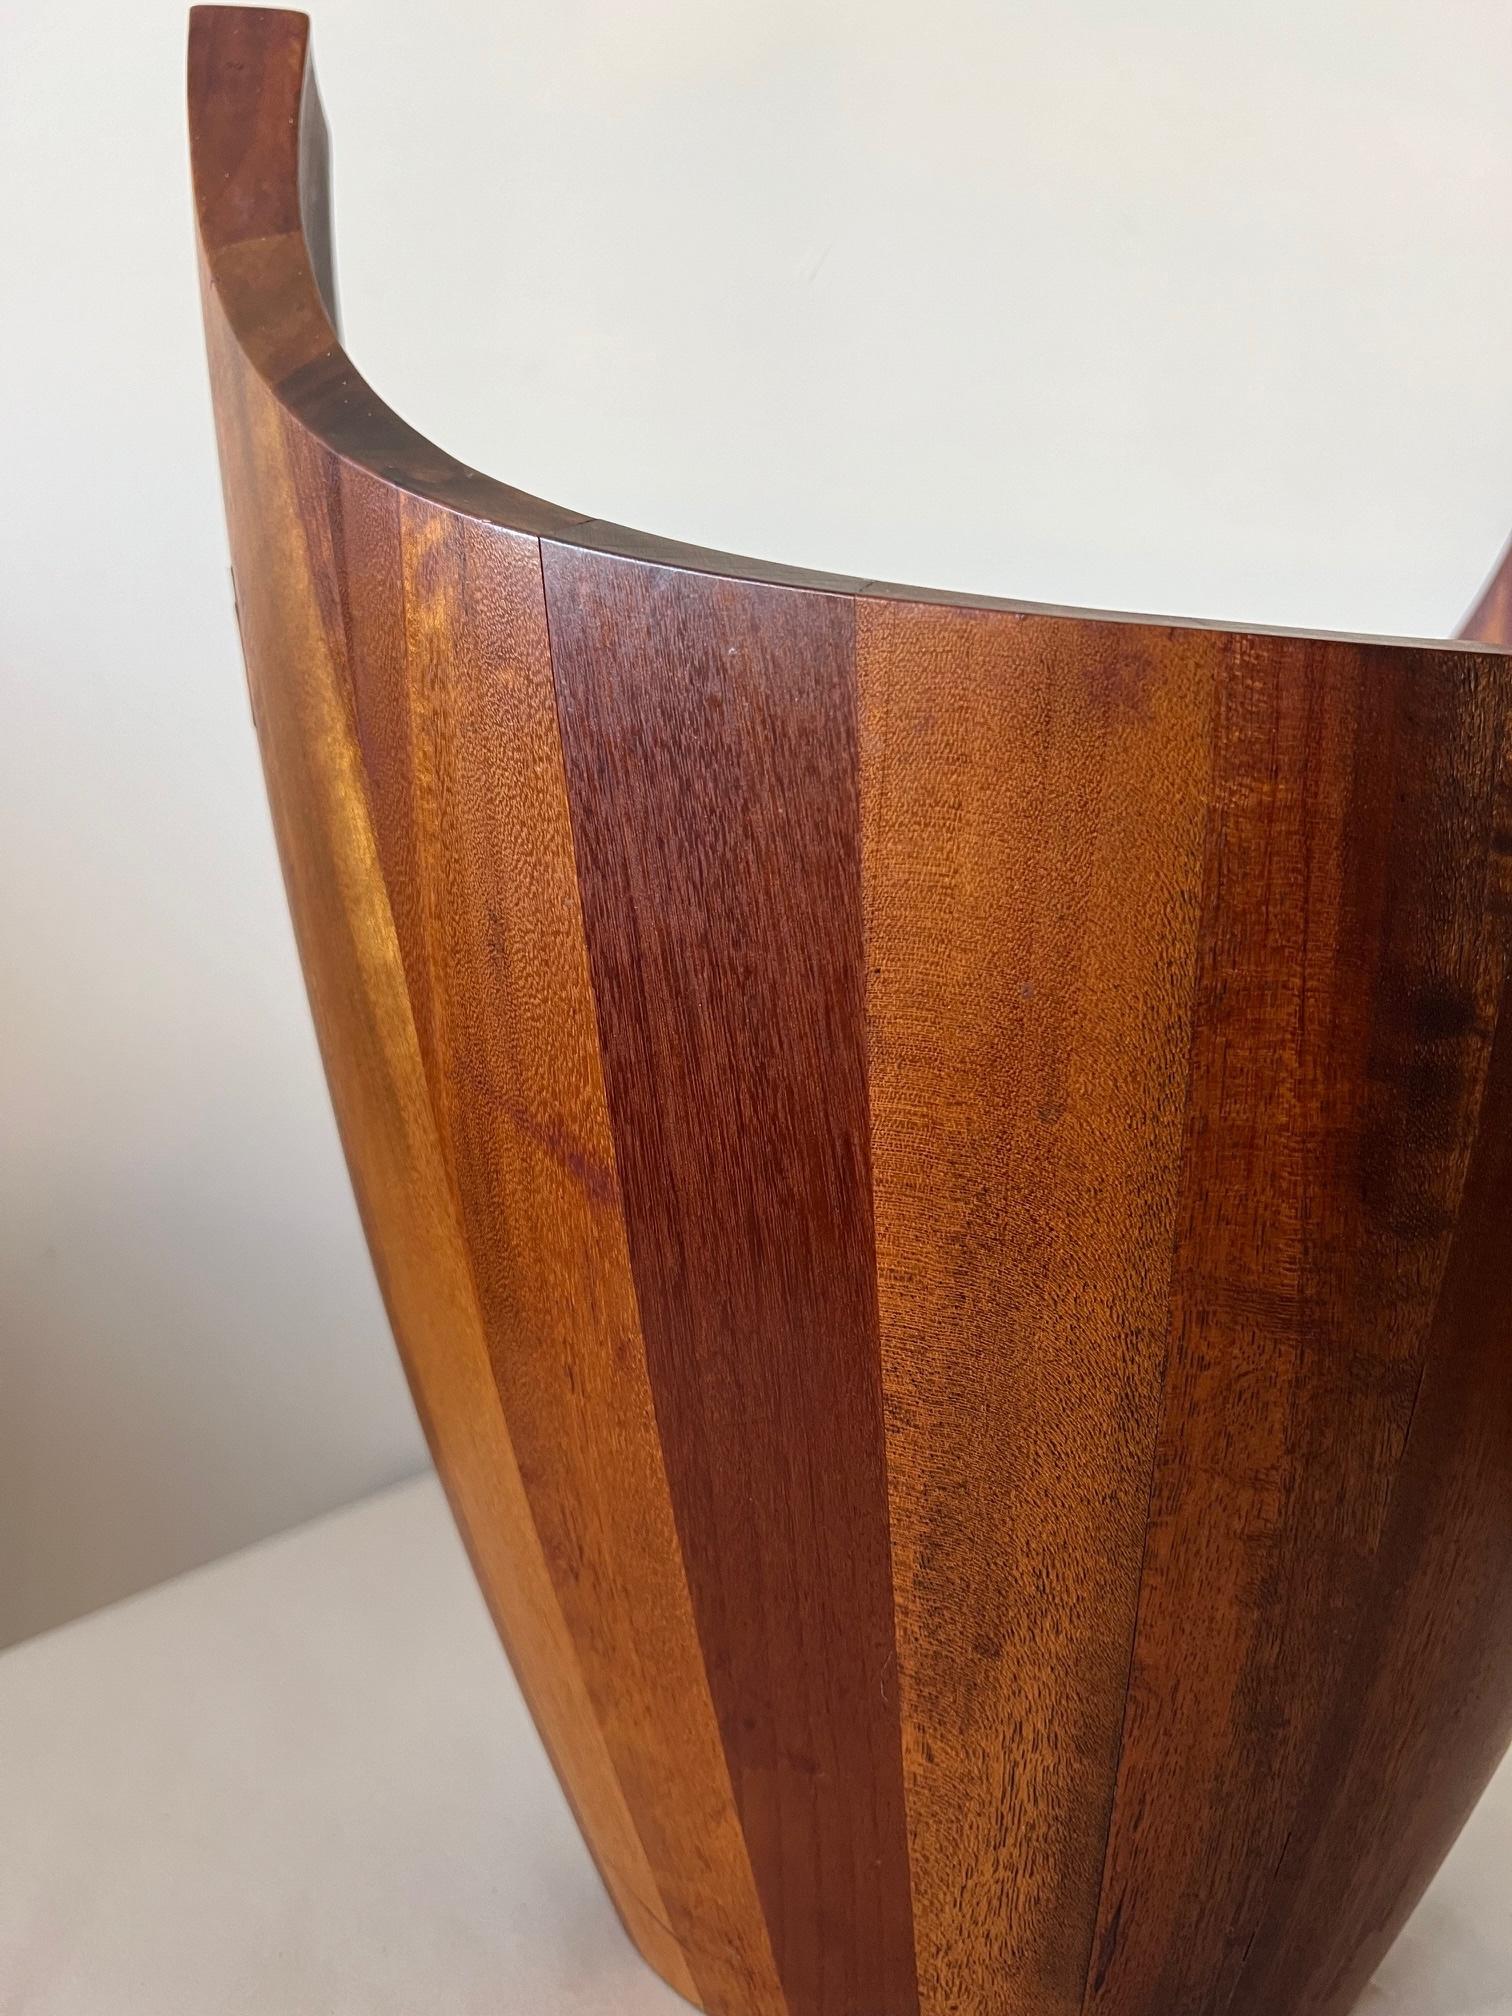 A rare and hard to find, large teak salad bowl by J.Quistgaard. Unusual form with raised handles and great patina. Note butterfly joints. Also Danish teak spoons (non Quistgaard design included).